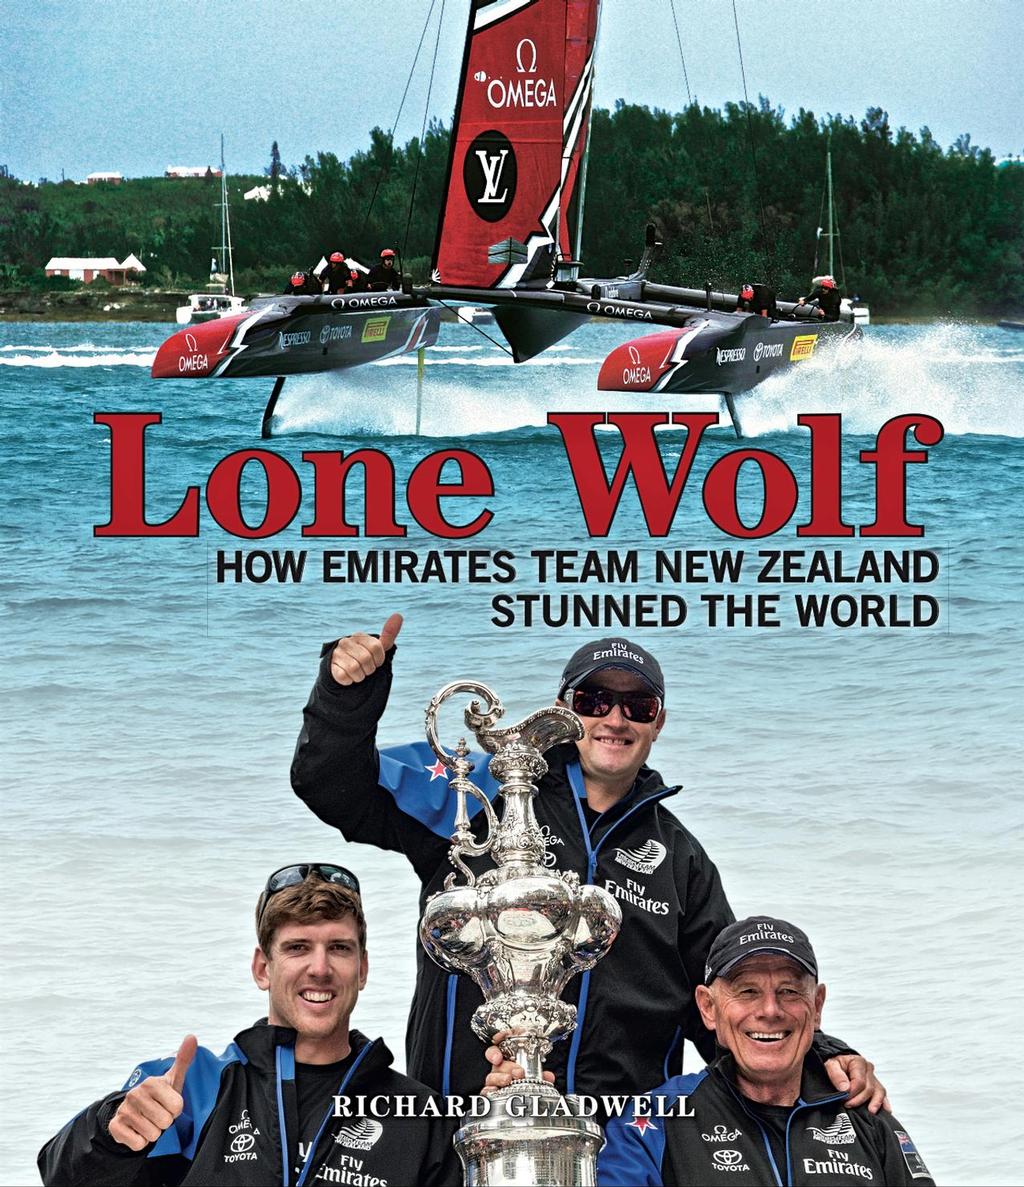 Lone Wolf - How Emirates Team New Zealand stunned the World <br />
ISBN: 978-1-988516-09-7<br />
<br />
Format: Softback - 250 x 210mm (portrait), colour throughout, 208pp © Richard Gladwell www.photosport.co.nz